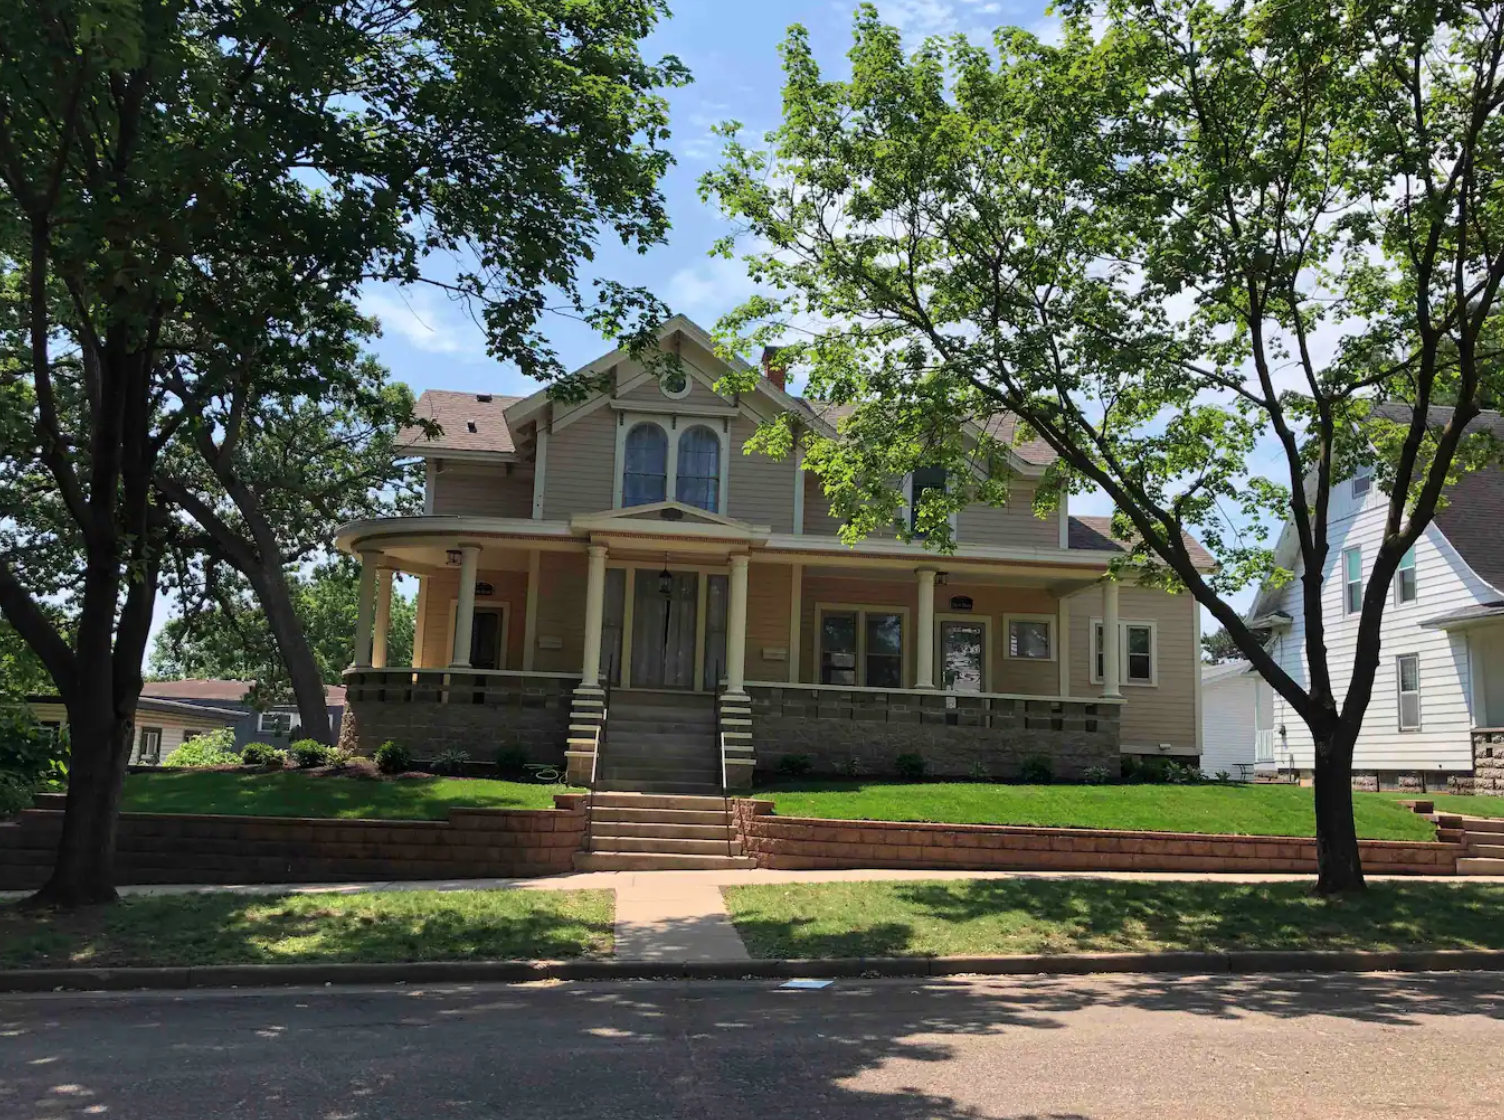 223 Hudson St, Eau Claire, Wisconsin 54703, 2 Bedrooms Bedrooms, ,2 BathroomsBathrooms,Multi-Family,Short-term-Vacation,223 Hudson St ,1142